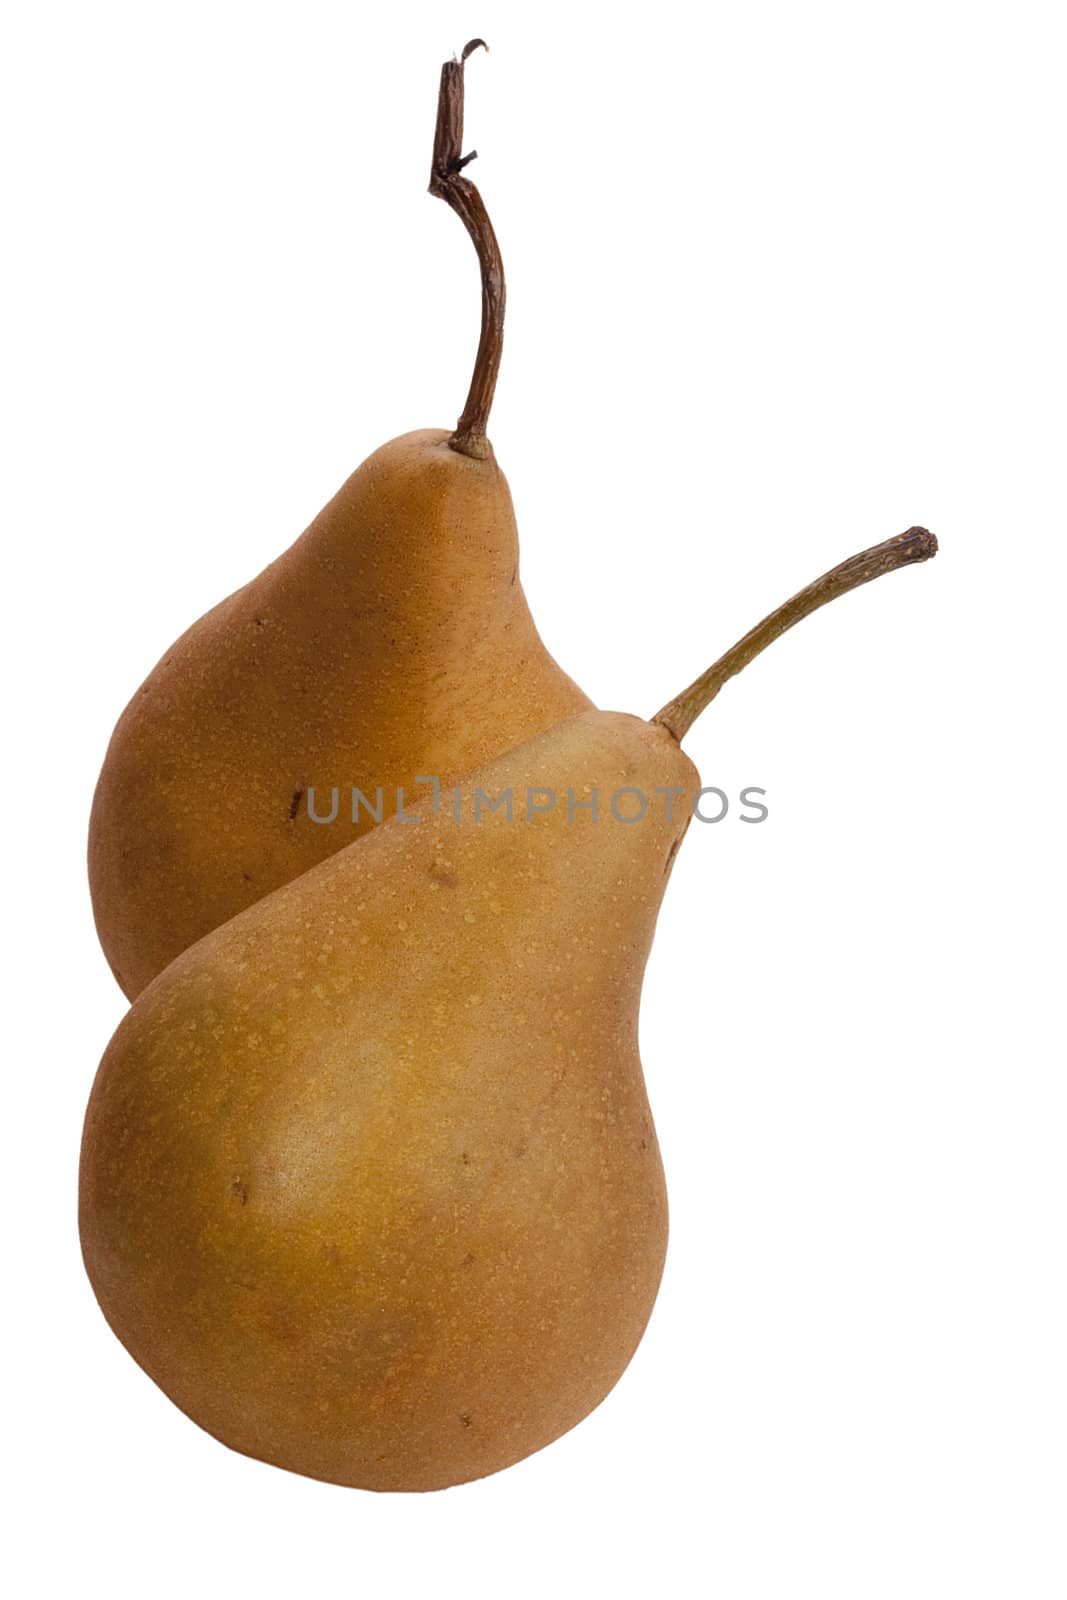 Flavovirent pears with a matte surface on a white background.